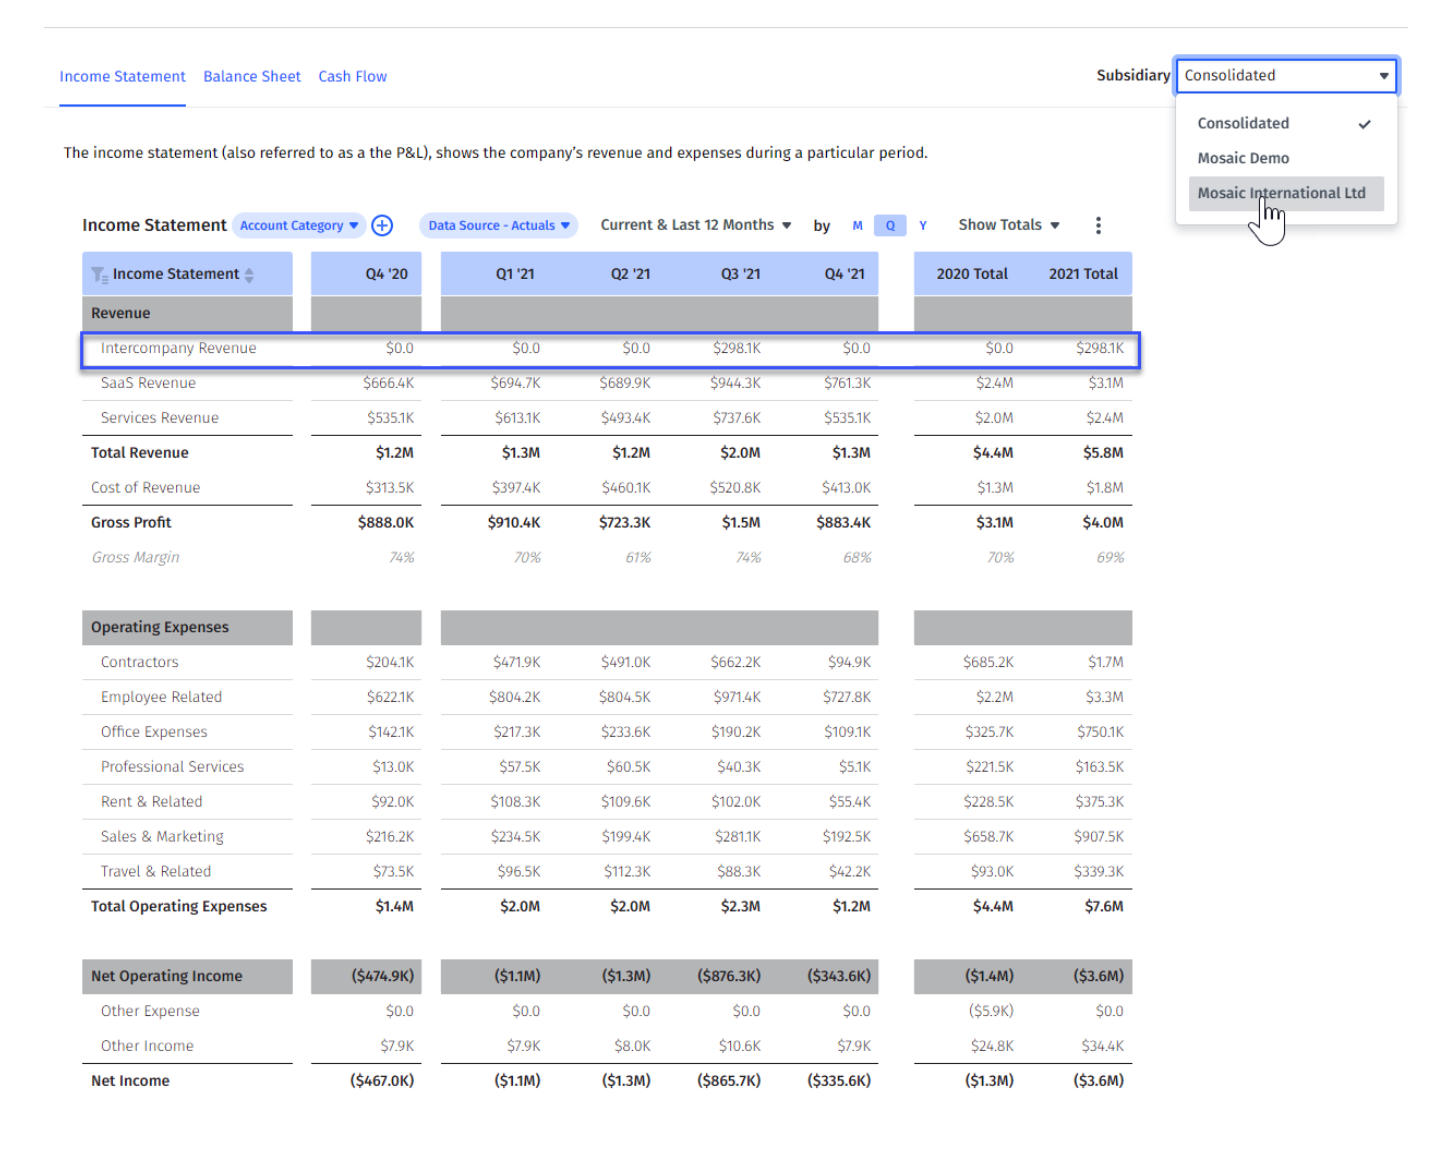 Breakdown of consolidated and subsidiary financial statements in Mosaic